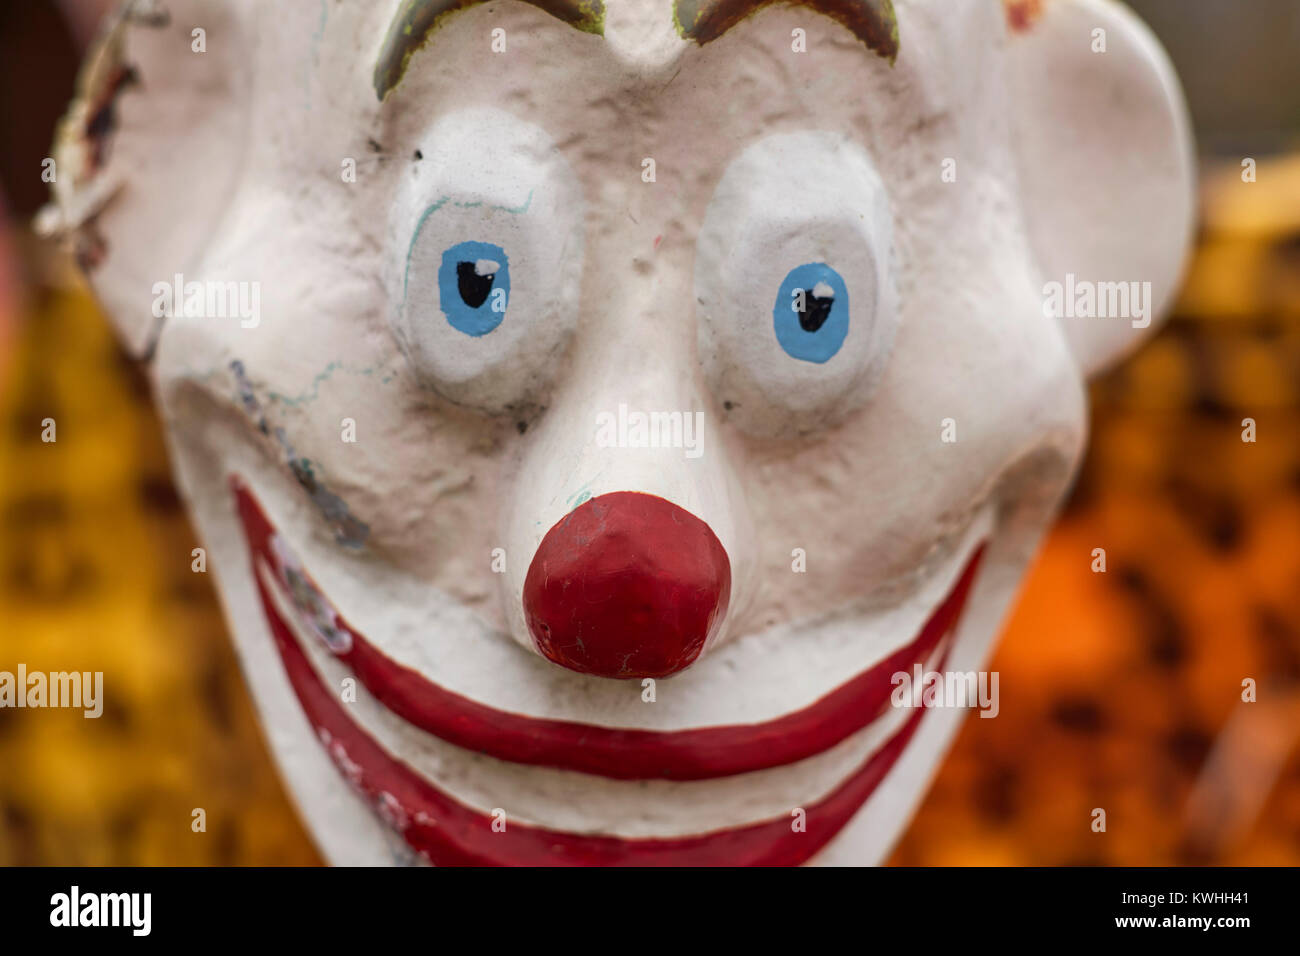 Clown face close up in Margate Stock Photo